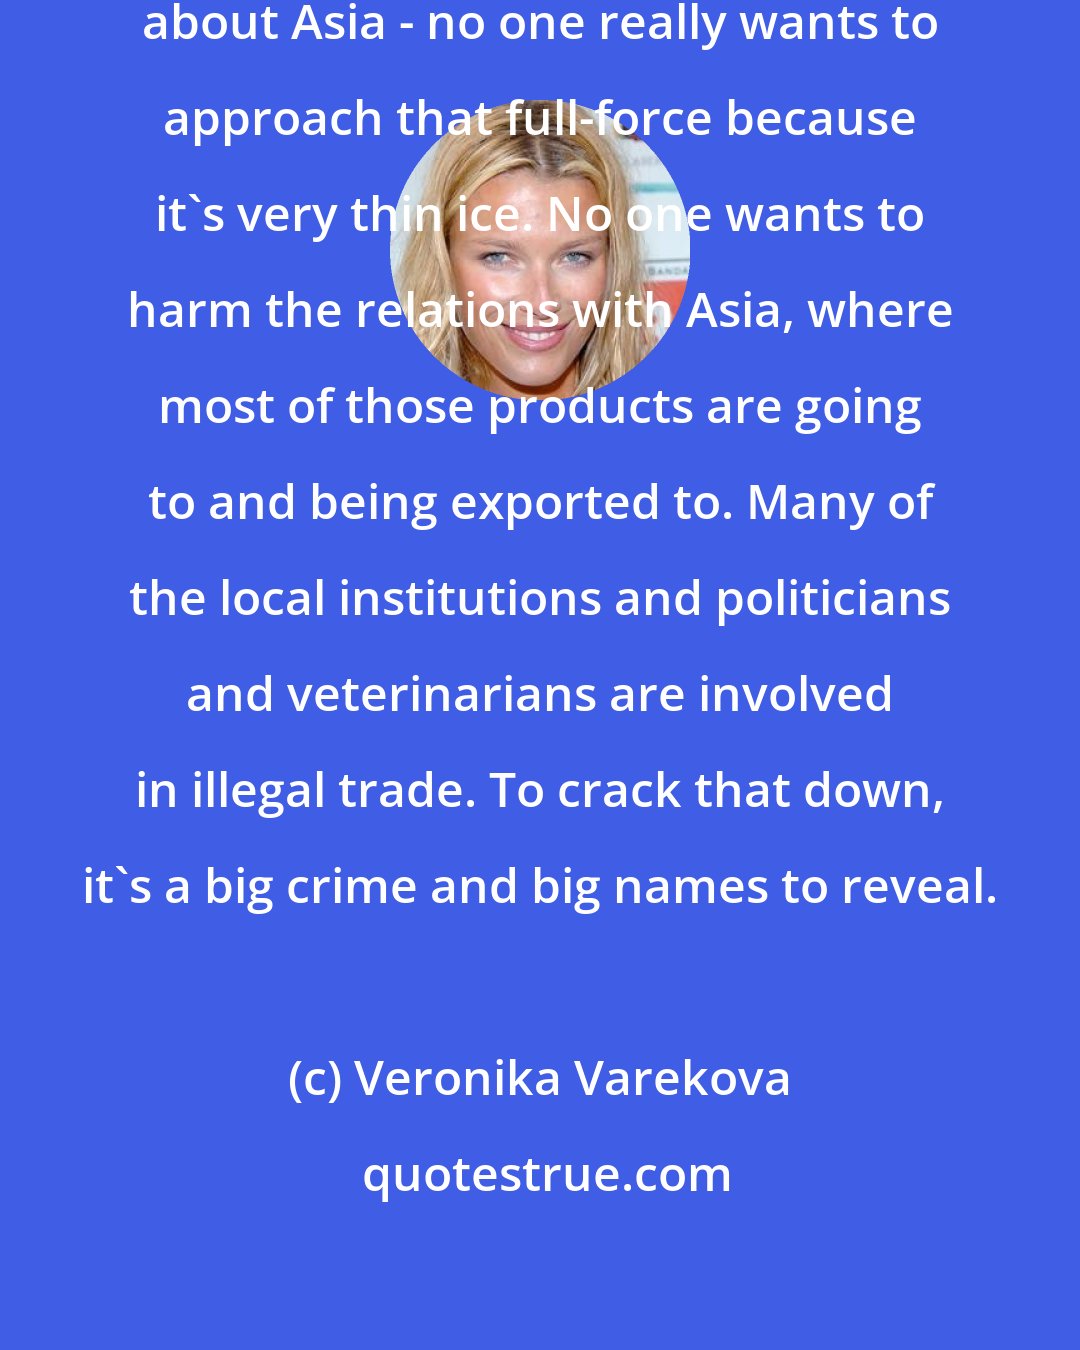 Veronika Varekova: There's politics. When you talk about Asia - no one really wants to approach that full-force because it's very thin ice. No one wants to harm the relations with Asia, where most of those products are going to and being exported to. Many of the local institutions and politicians and veterinarians are involved in illegal trade. To crack that down, it's a big crime and big names to reveal.